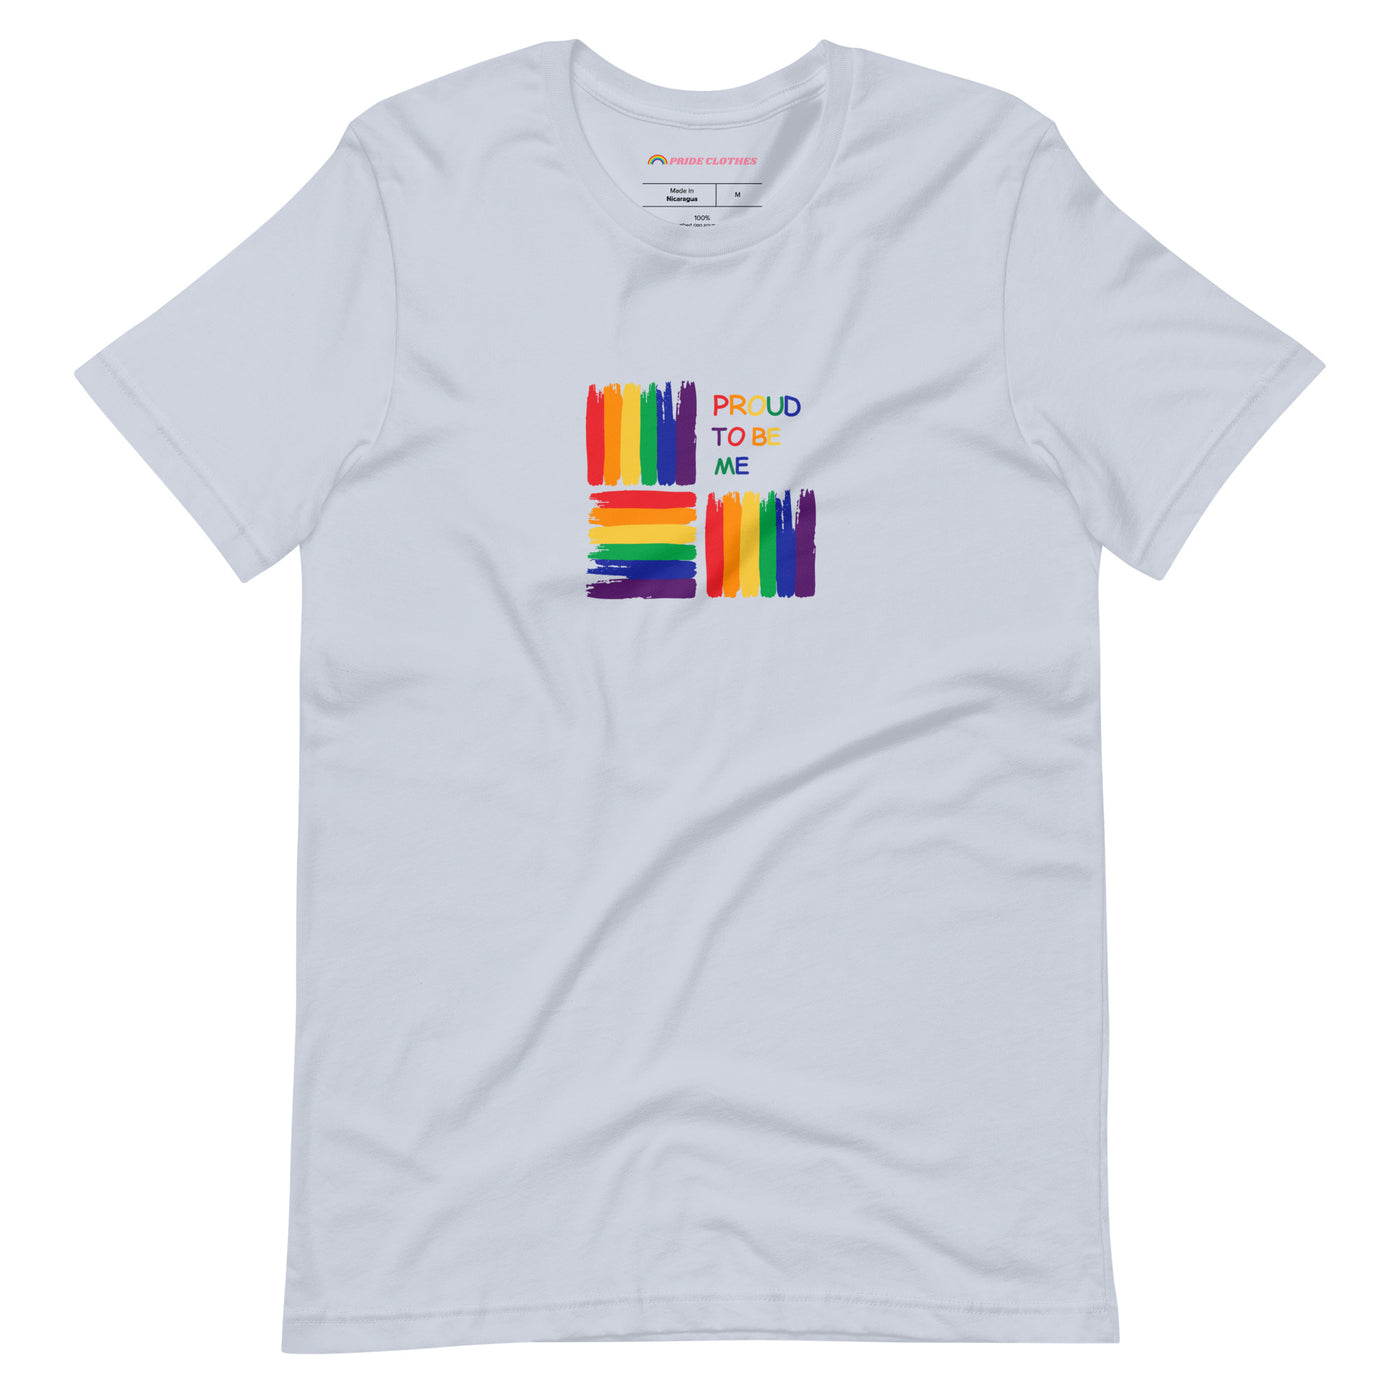 Pride Clothes - Around the Block Proud to Be Me Rainbow Pride T-Shirt - Light Blue